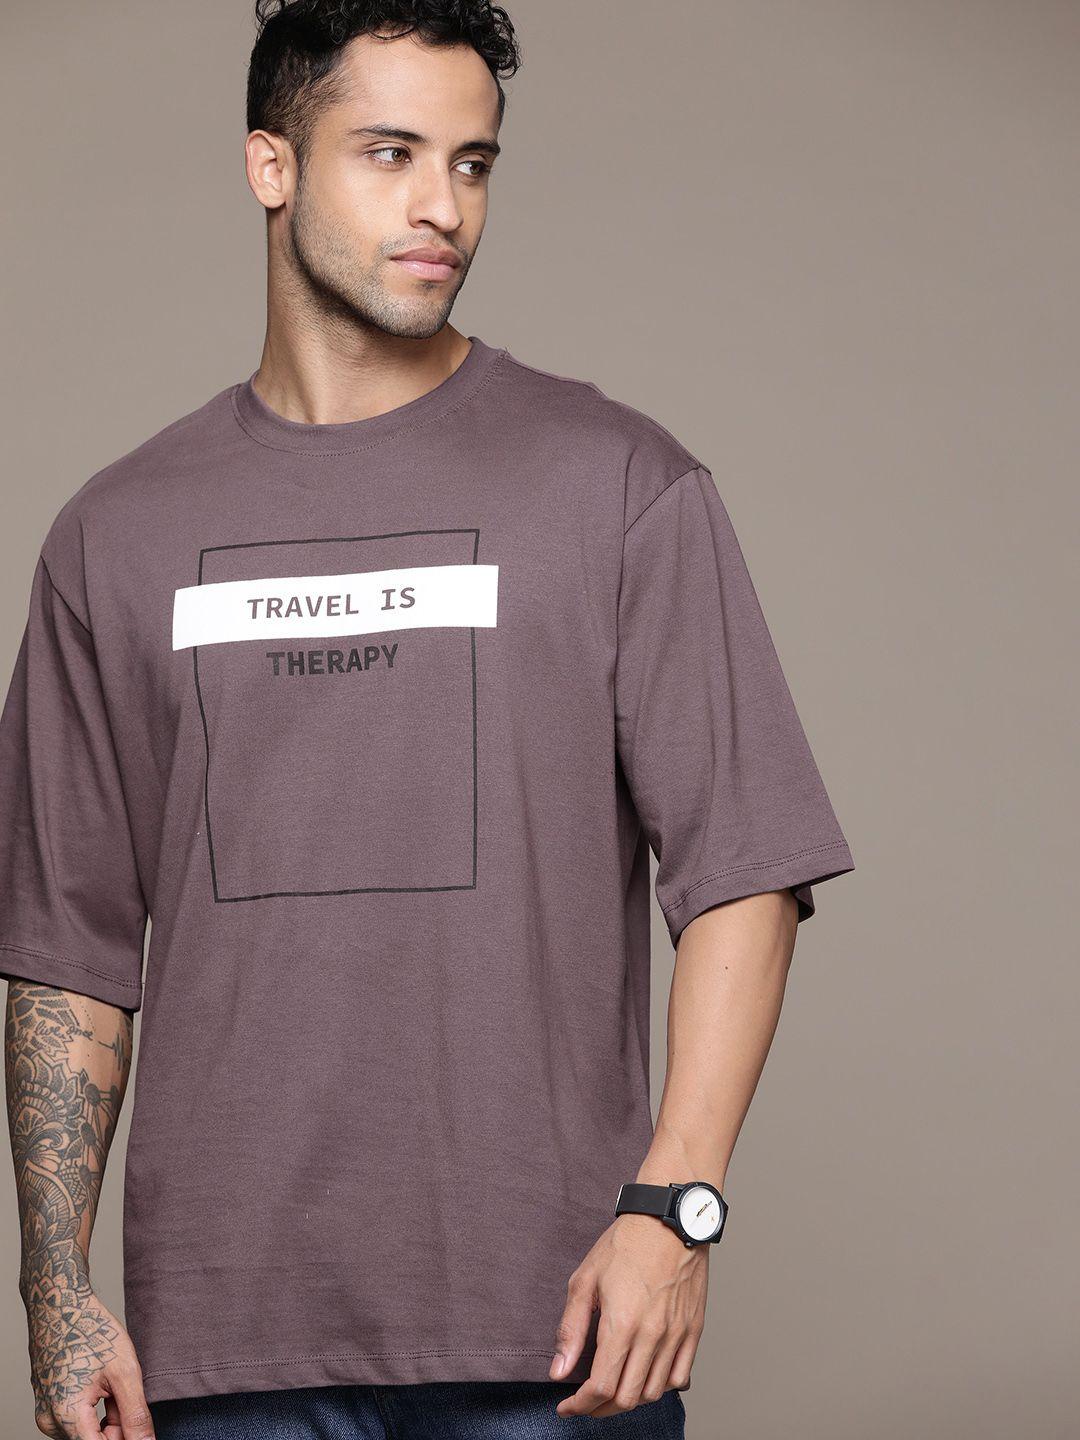 the roadster lifestyle co. printed pure cotton oversized t-shirt